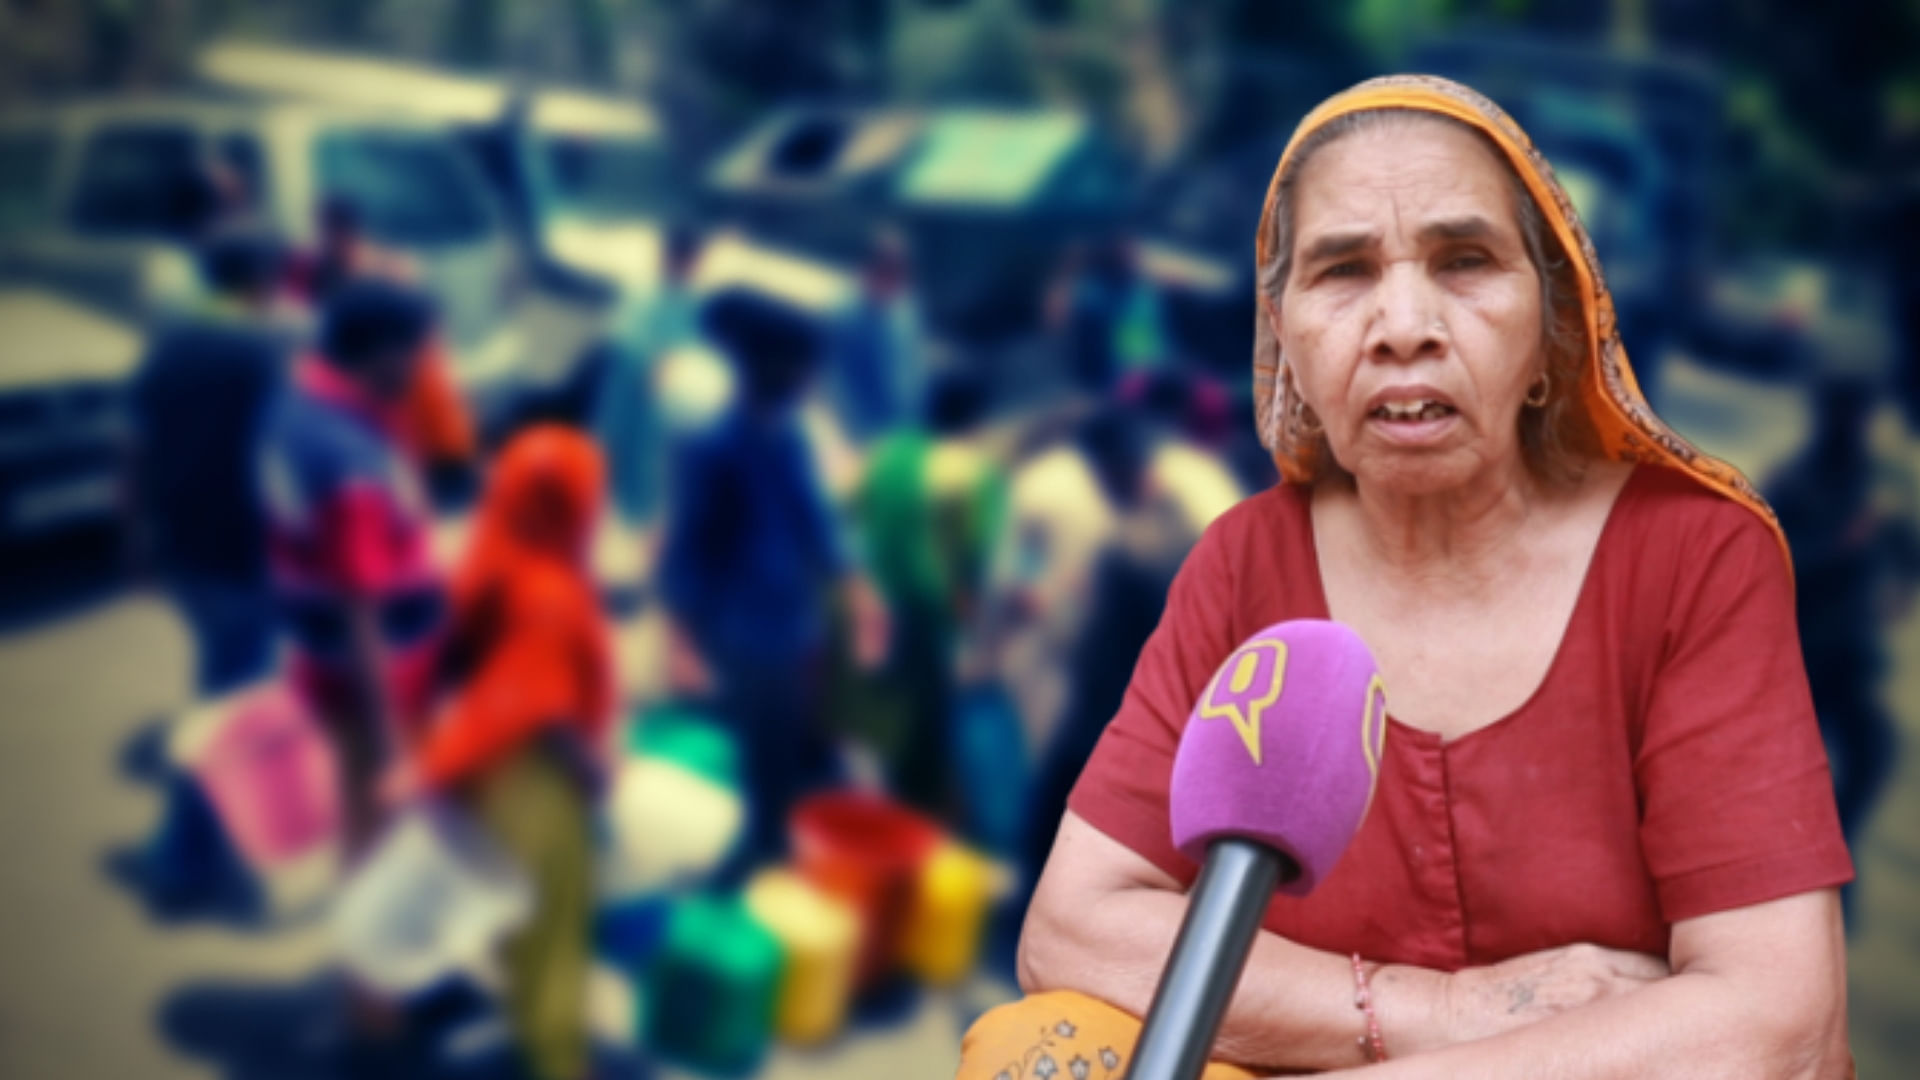 Mayadevi complains that the villages lacks cleanliness, toilets and faces major water shortage.&nbsp;